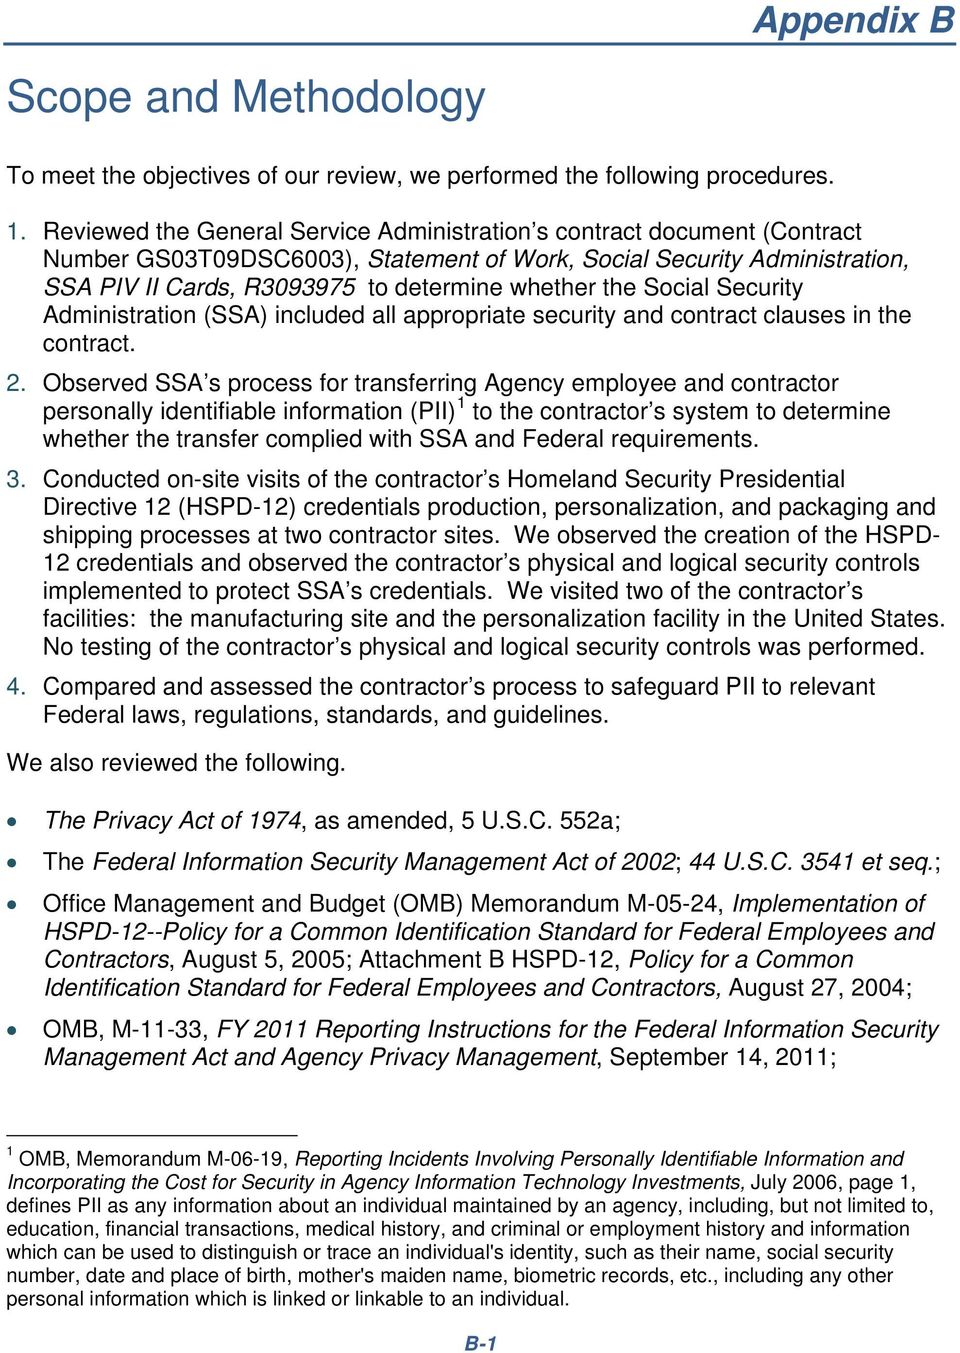 the Social Security Administration (SSA) included all appropriate security and contract clauses in the contract. 2.